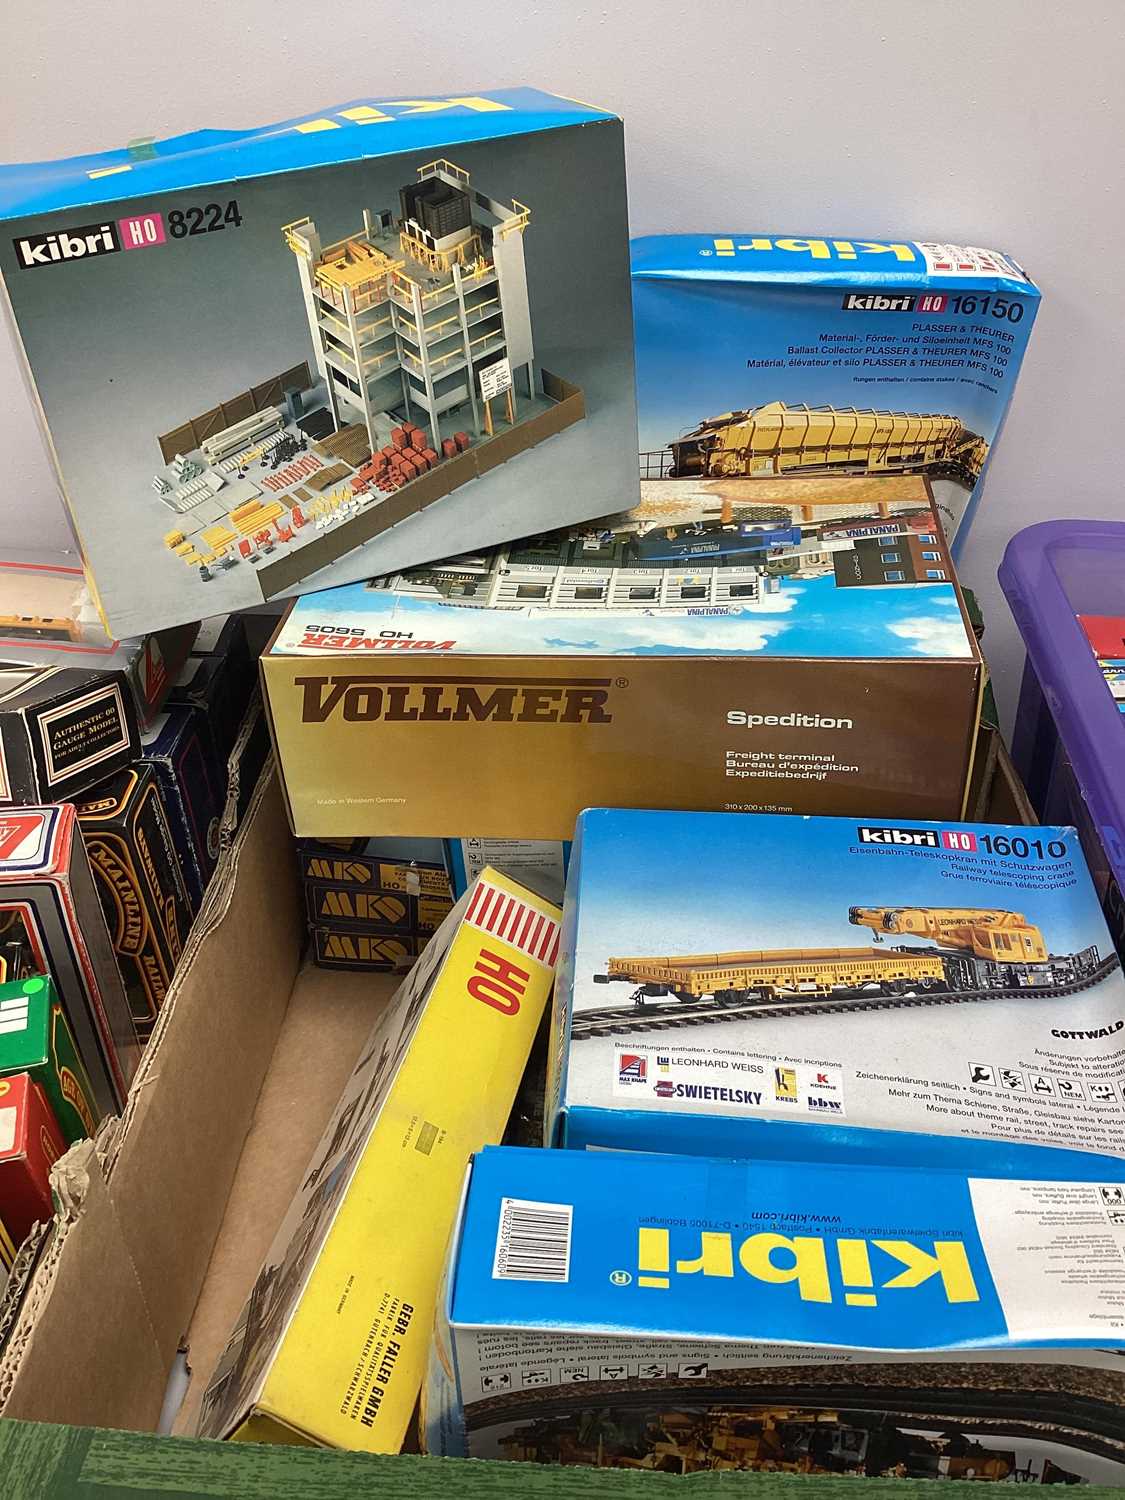 HO gauge lineside kits by Kibri, Vollmermetc, boxed, unchecked for completeness, approx 15